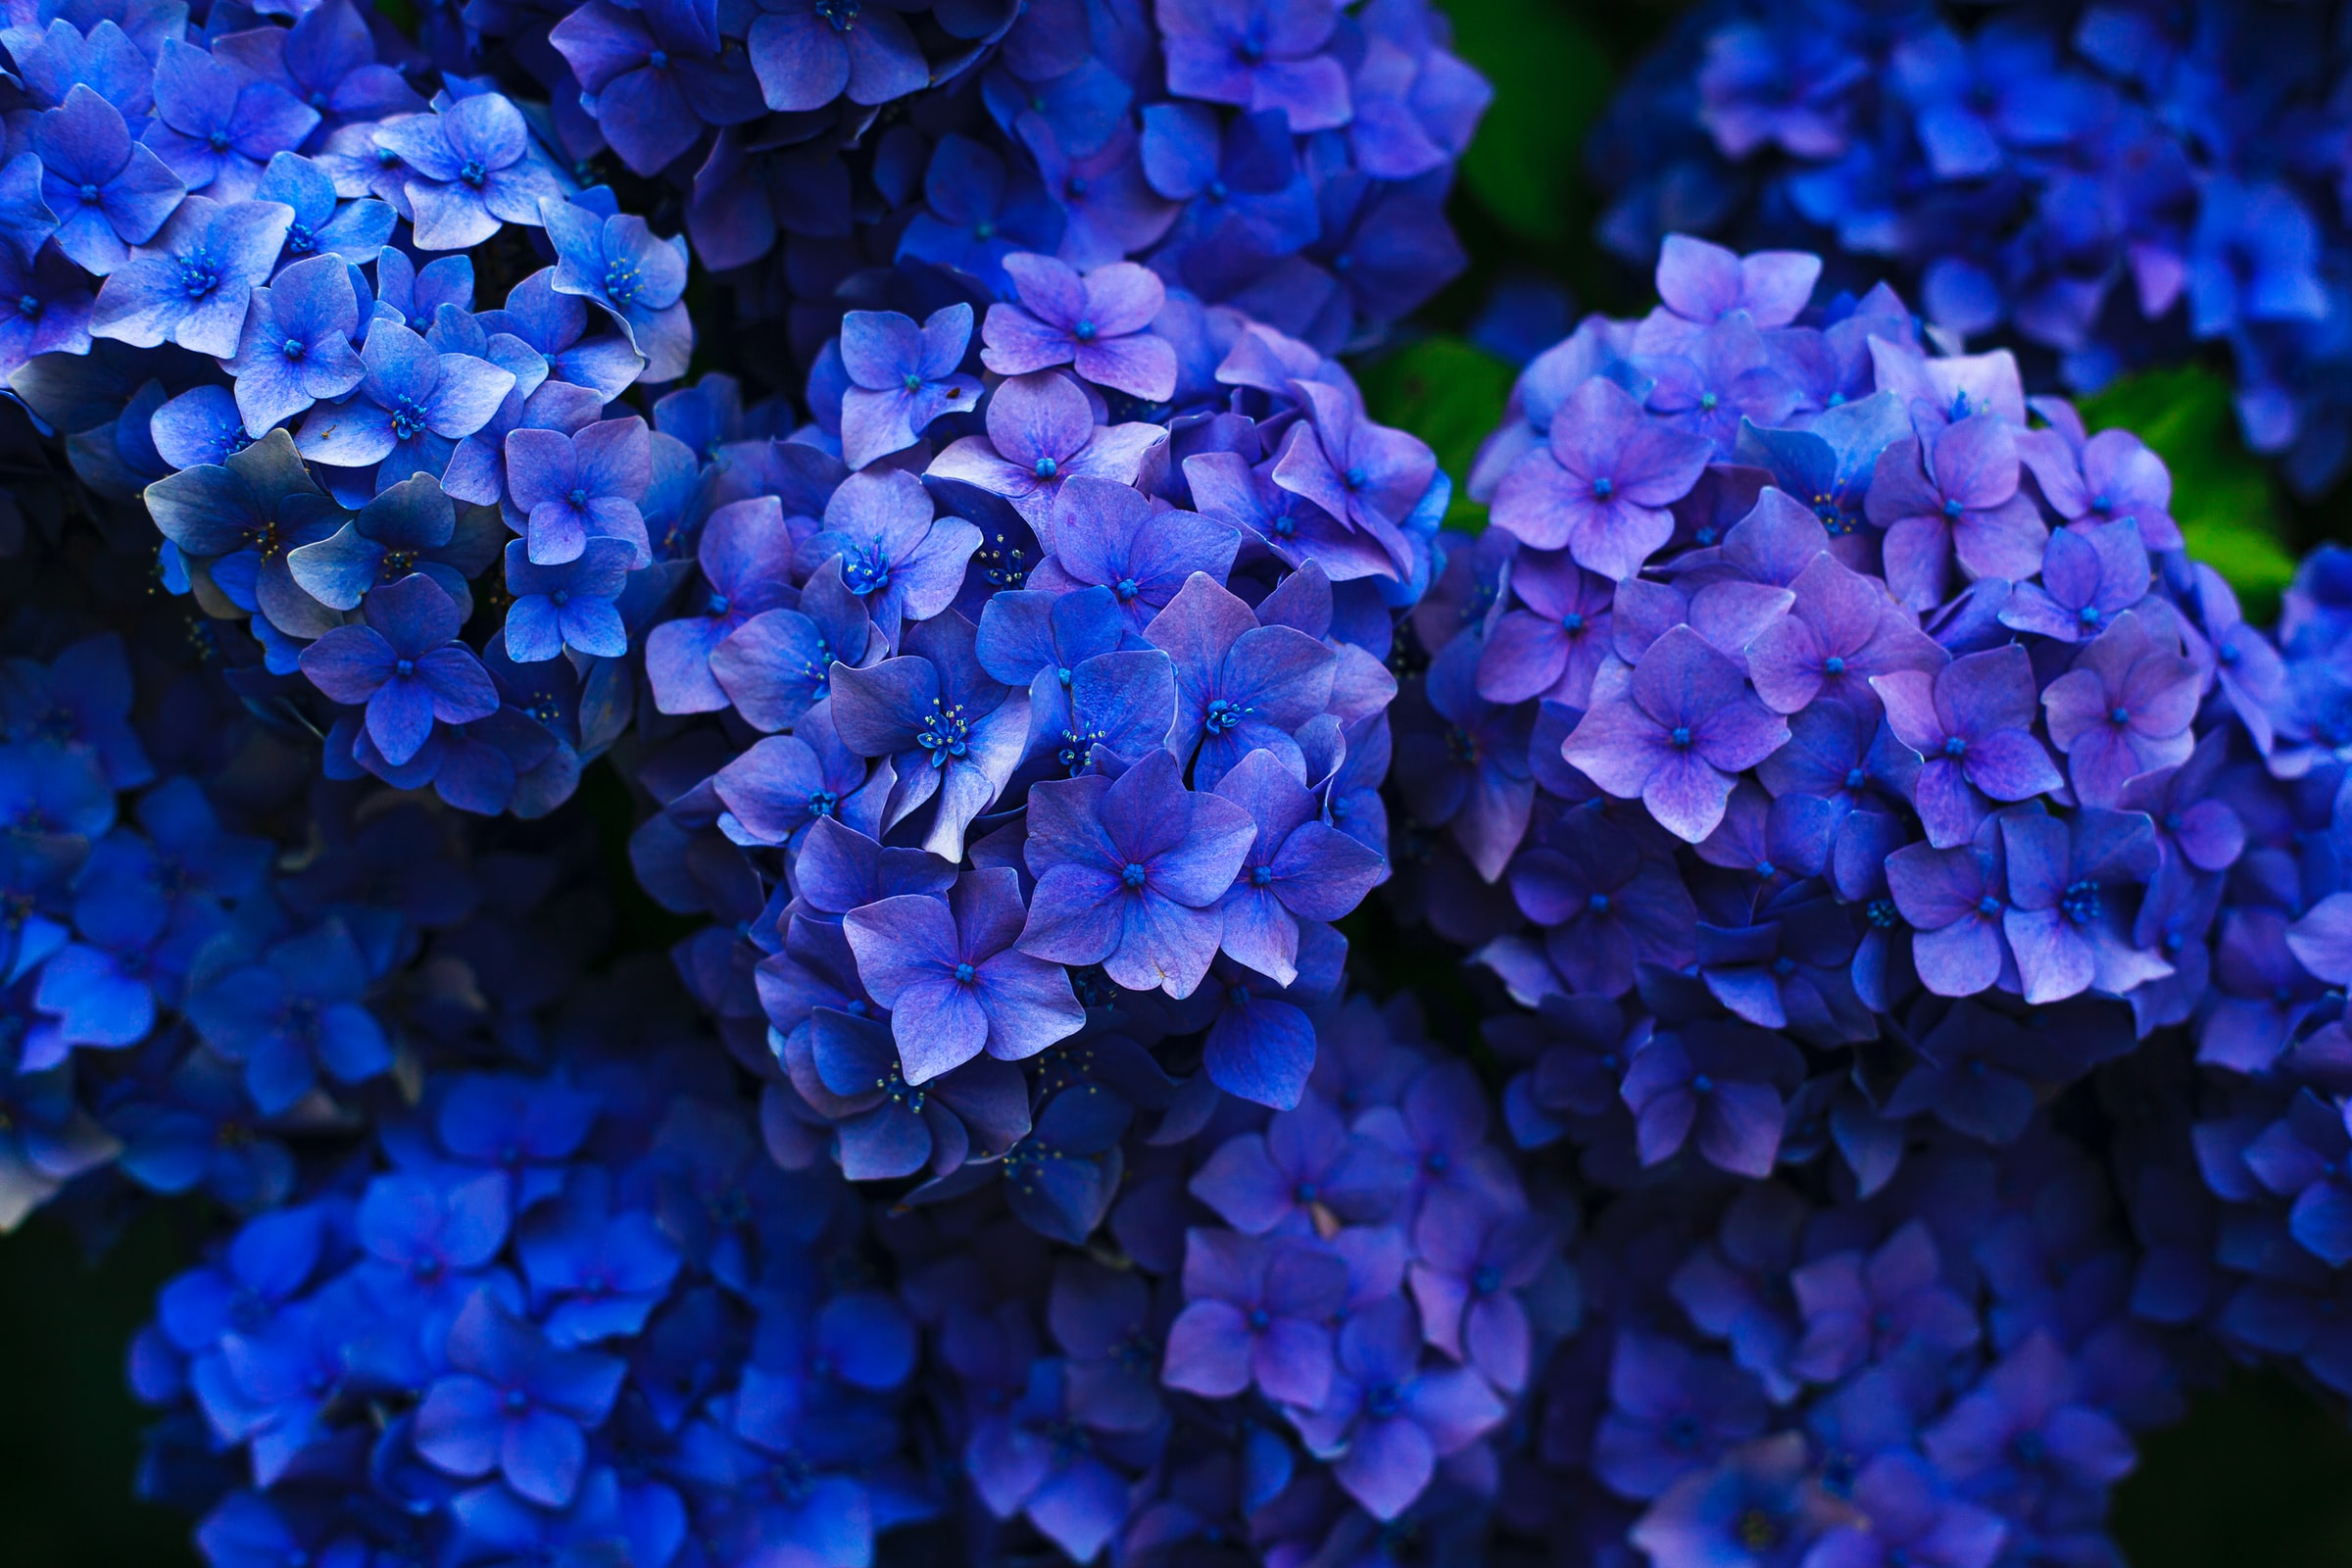 Hydrangea meaning and Symbolism